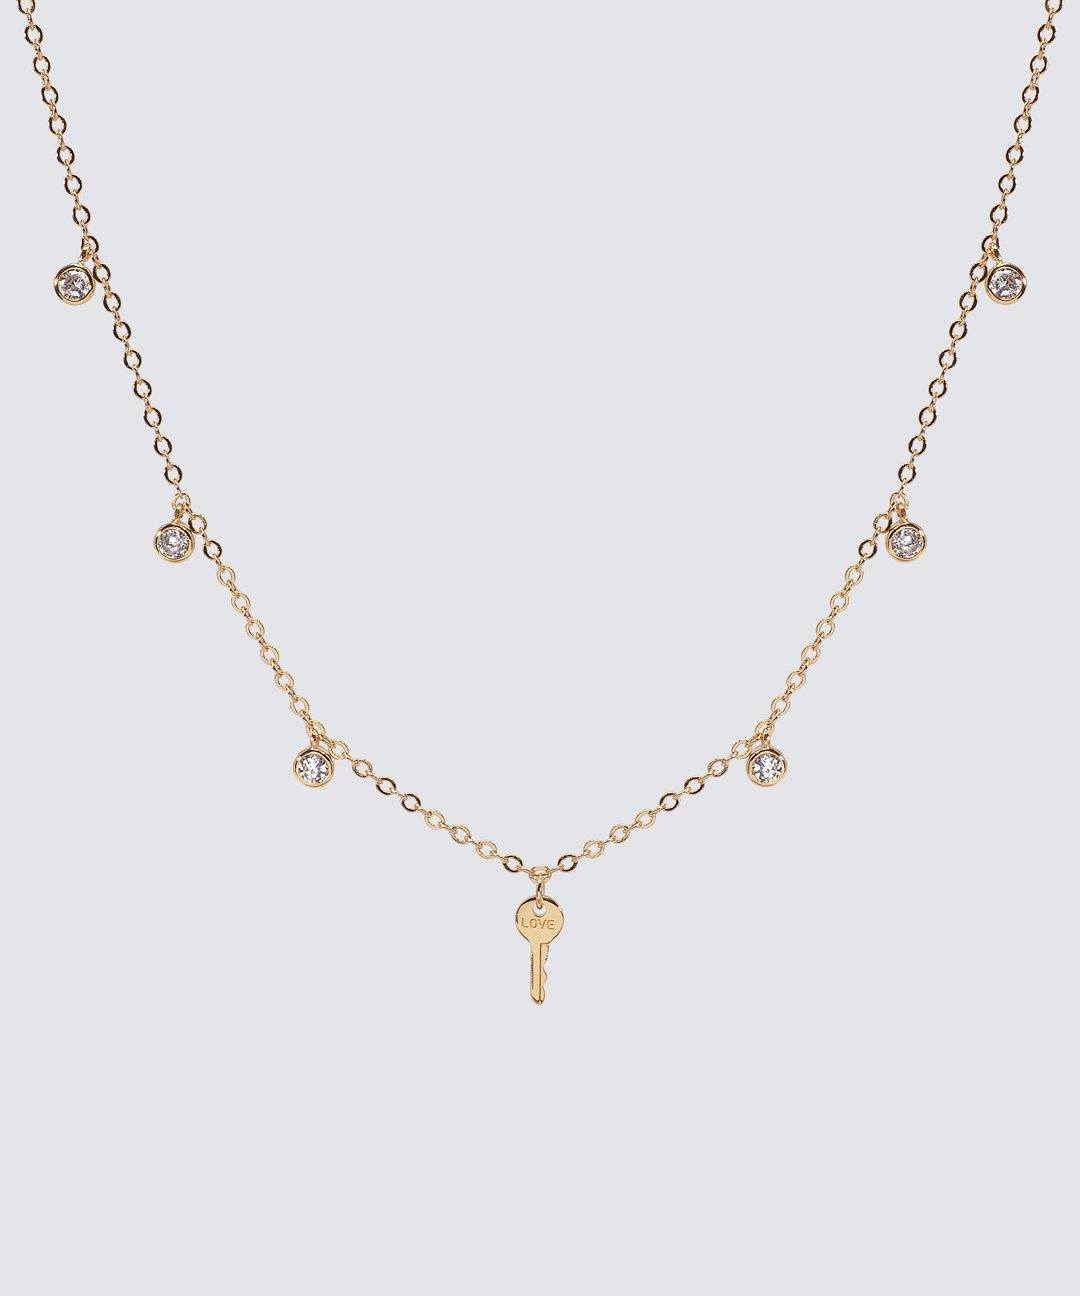 Crystal Droplet + Mini Key Necklace Necklaces The Giving Keys LOVE GOLD 